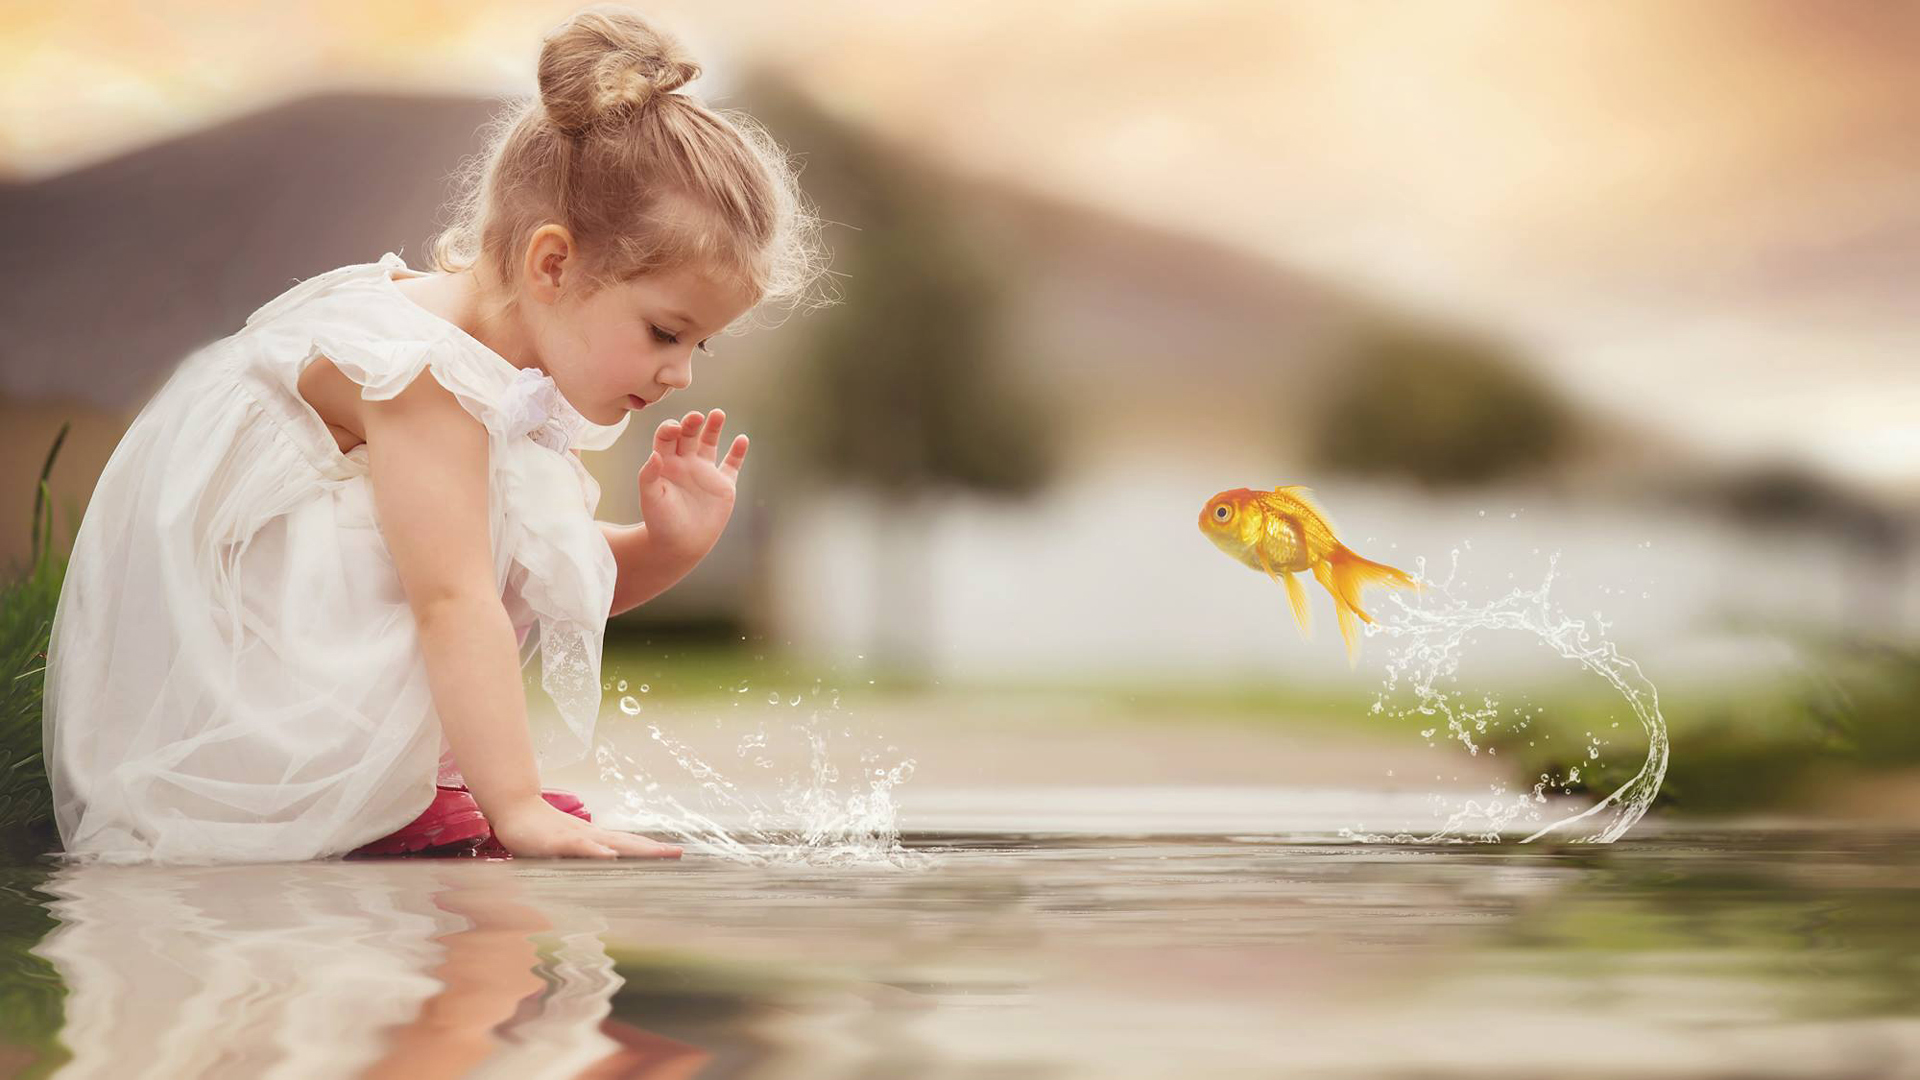 Cute Little Girl Is Playing On Water Wearing White Dress With Reflection HD Cute Wallpaper